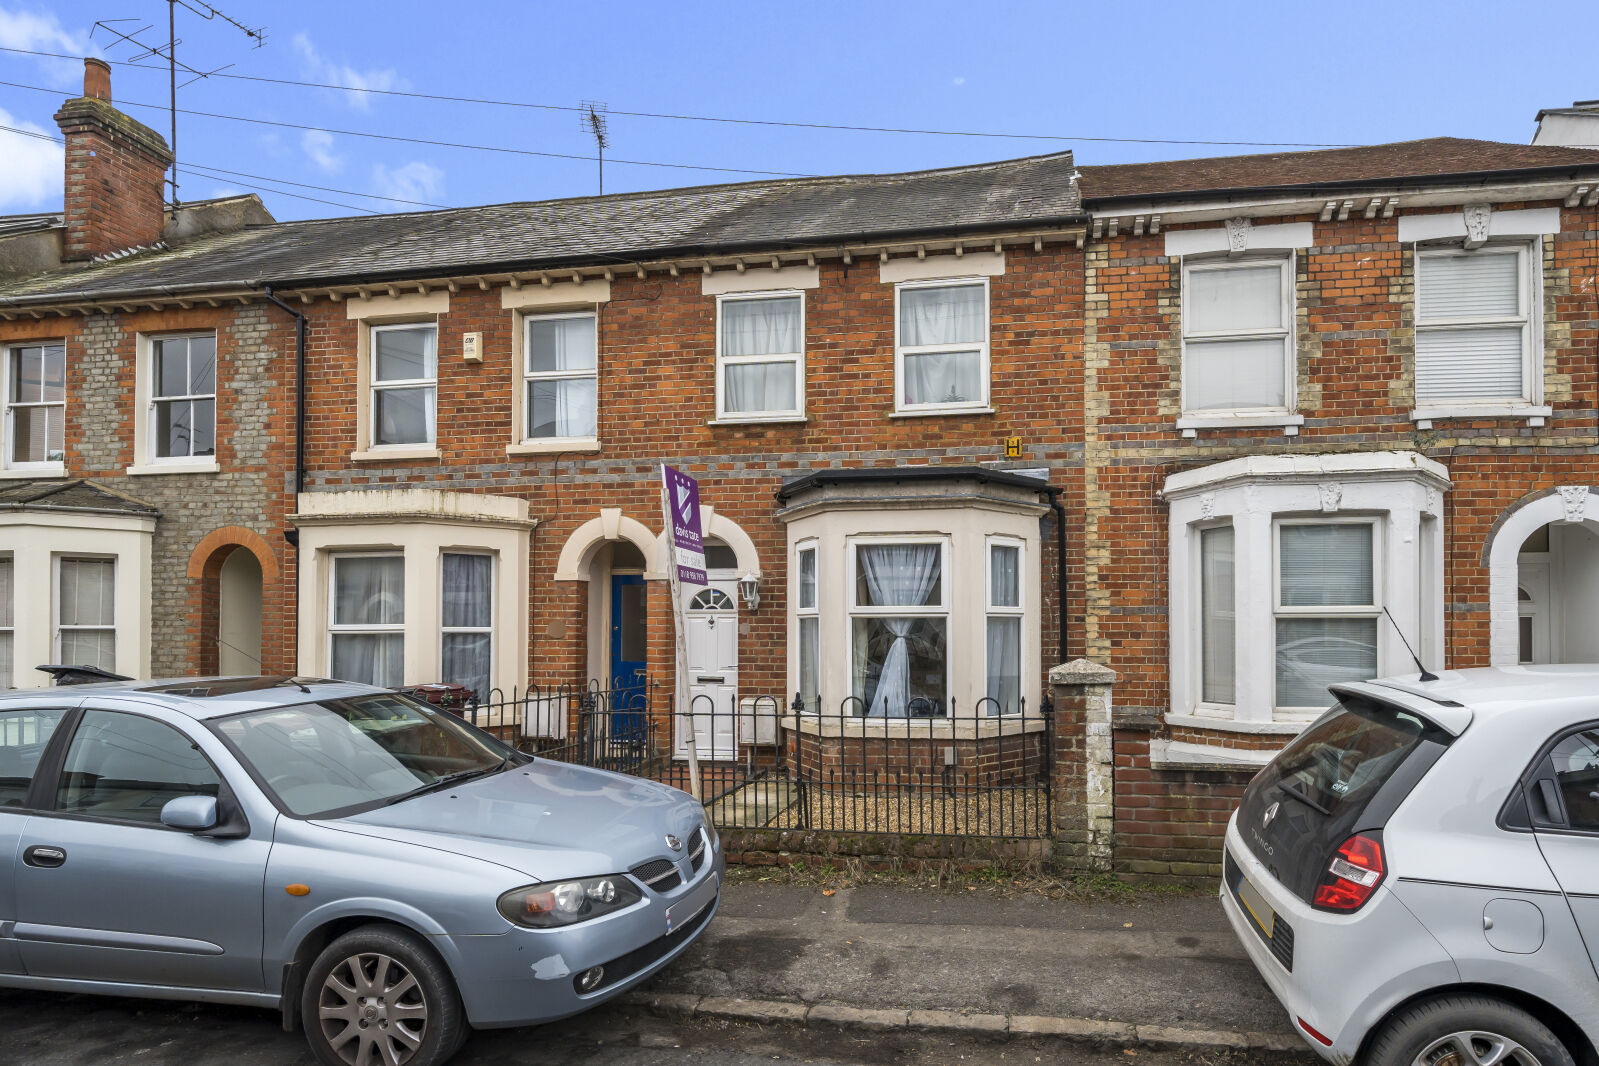 4 bedroom mid terraced house for sale Donnington Road, Reading, RG1, main image